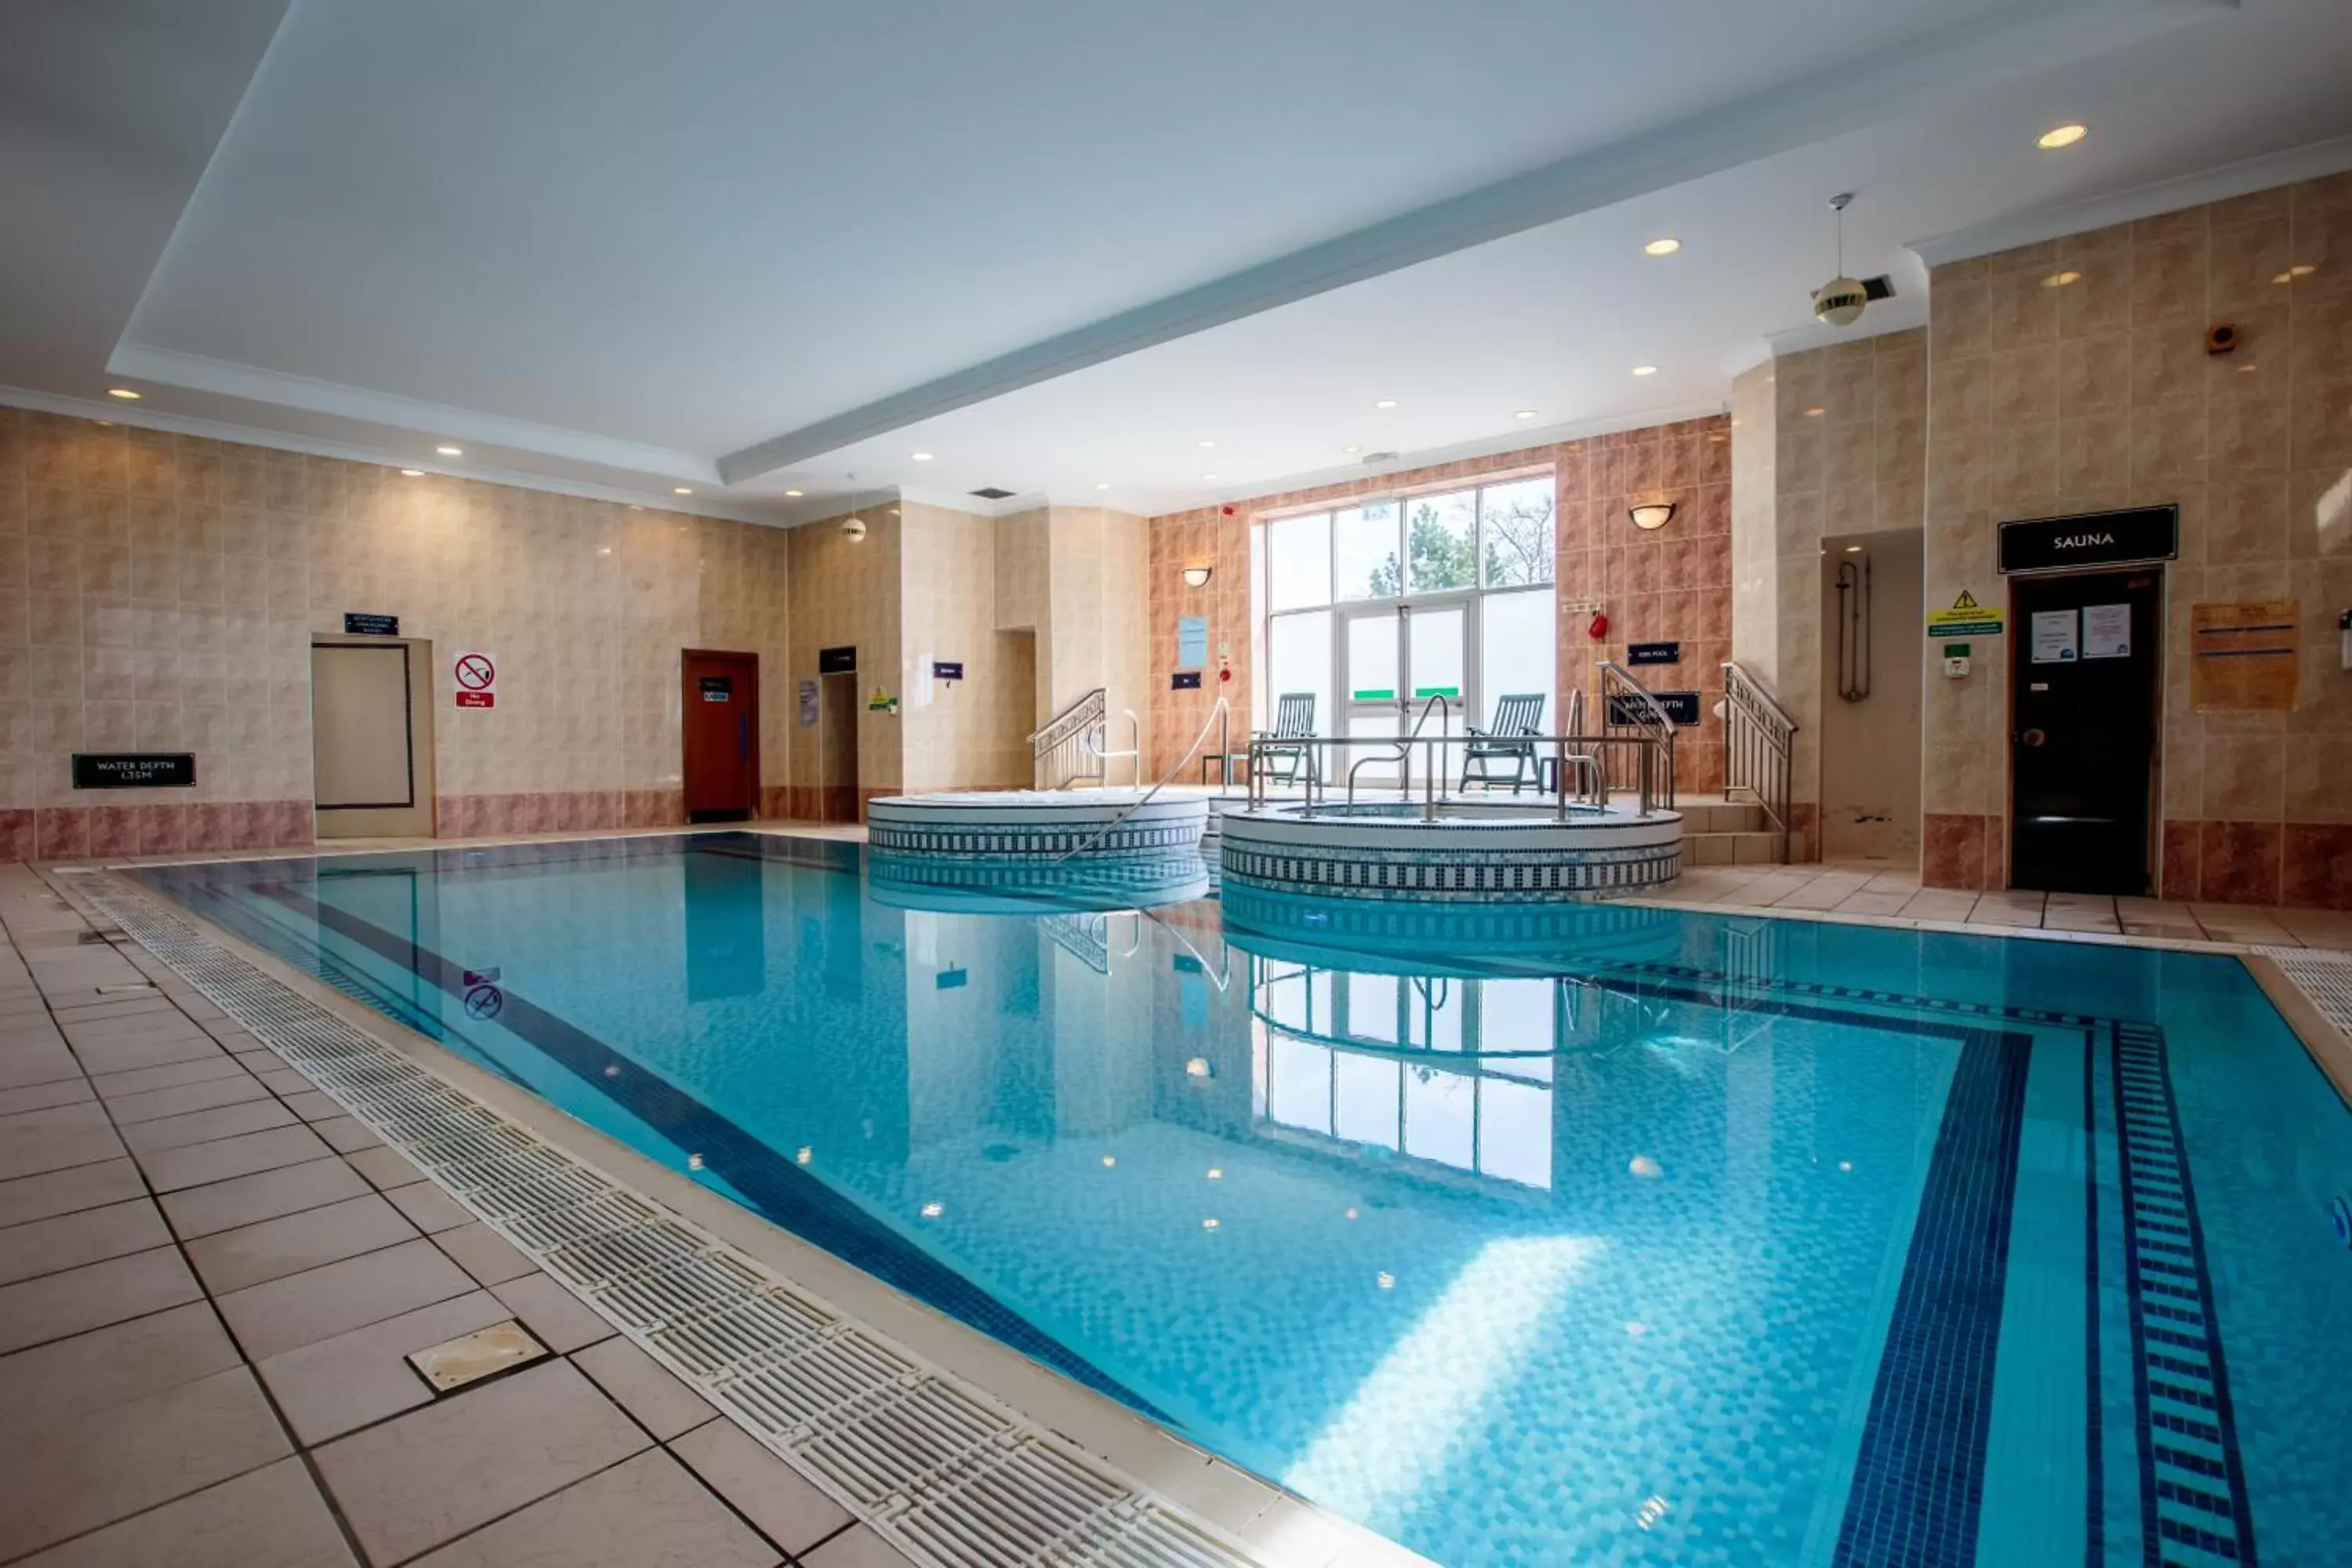 Swimming Pool in The Aberdeen Altens Hotel